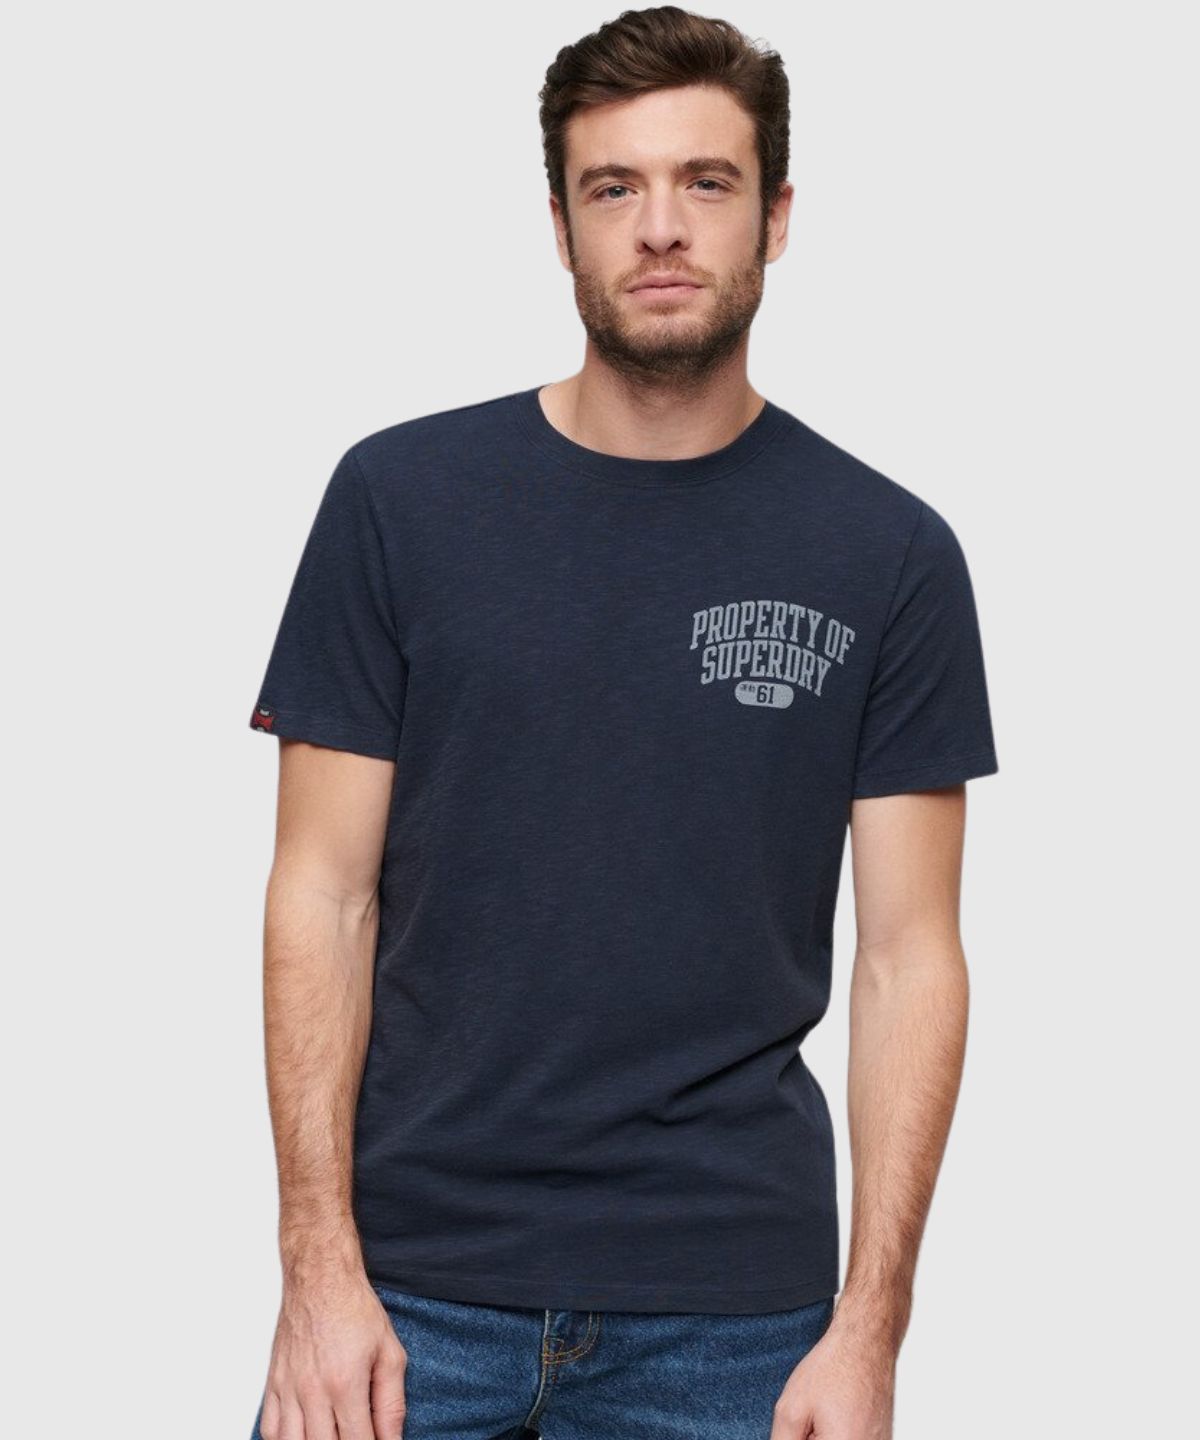 Athletic College Graphic Tee